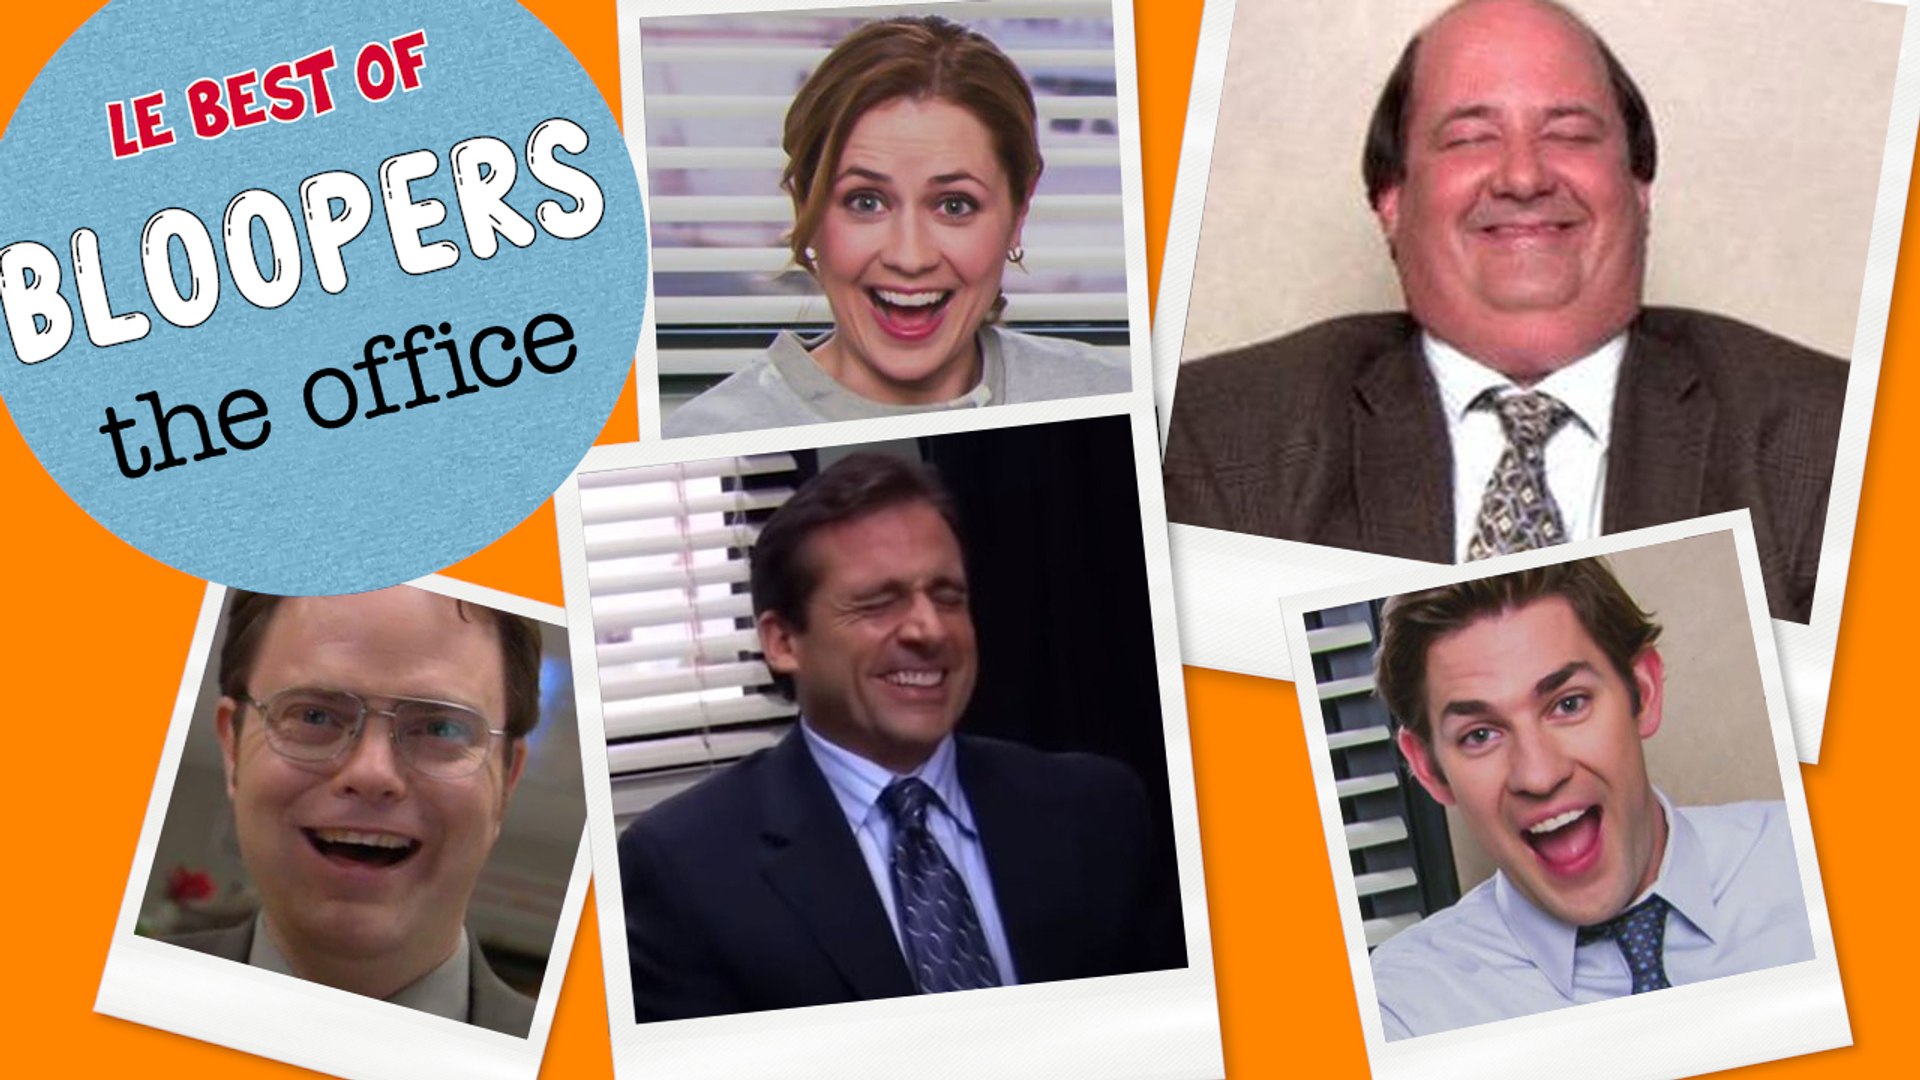 THE OFFICE - Bloopers - Vidéo Dailymotion